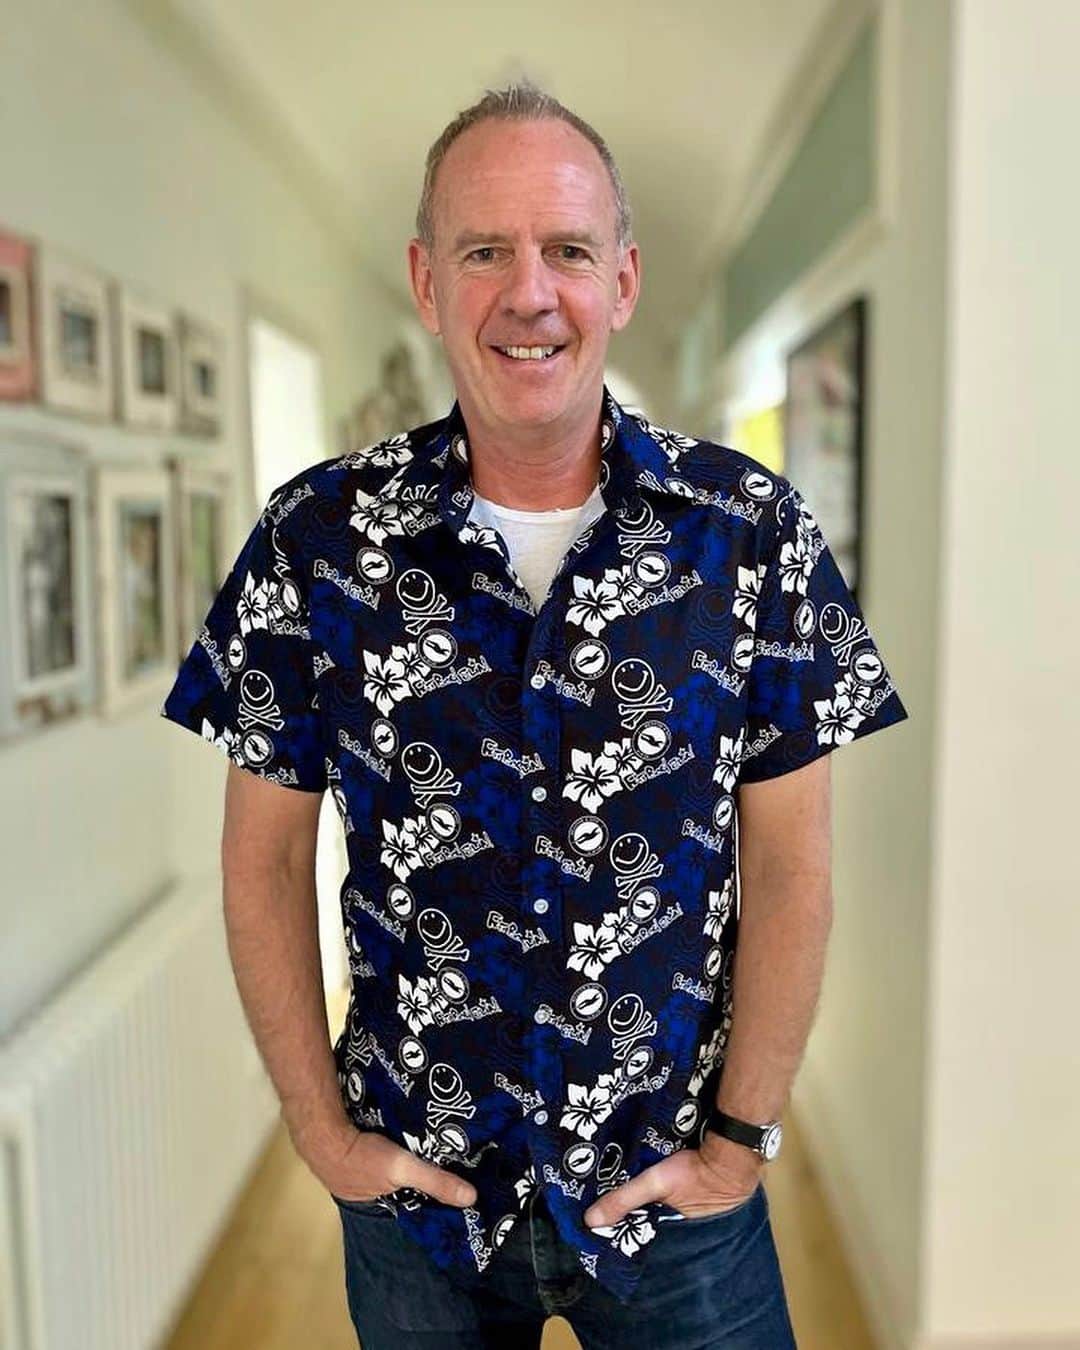 FatboySlimのインスタグラム：「So honoured to be making a merch range with my favourite football team….  The Fatboy Slim x @officialbhafc collection is live now, including this shirt, T-shirts, bucket hat, bag and Hoody! LINK IN BIO UTA.  #brightonandhovealbion #fatboyslim」